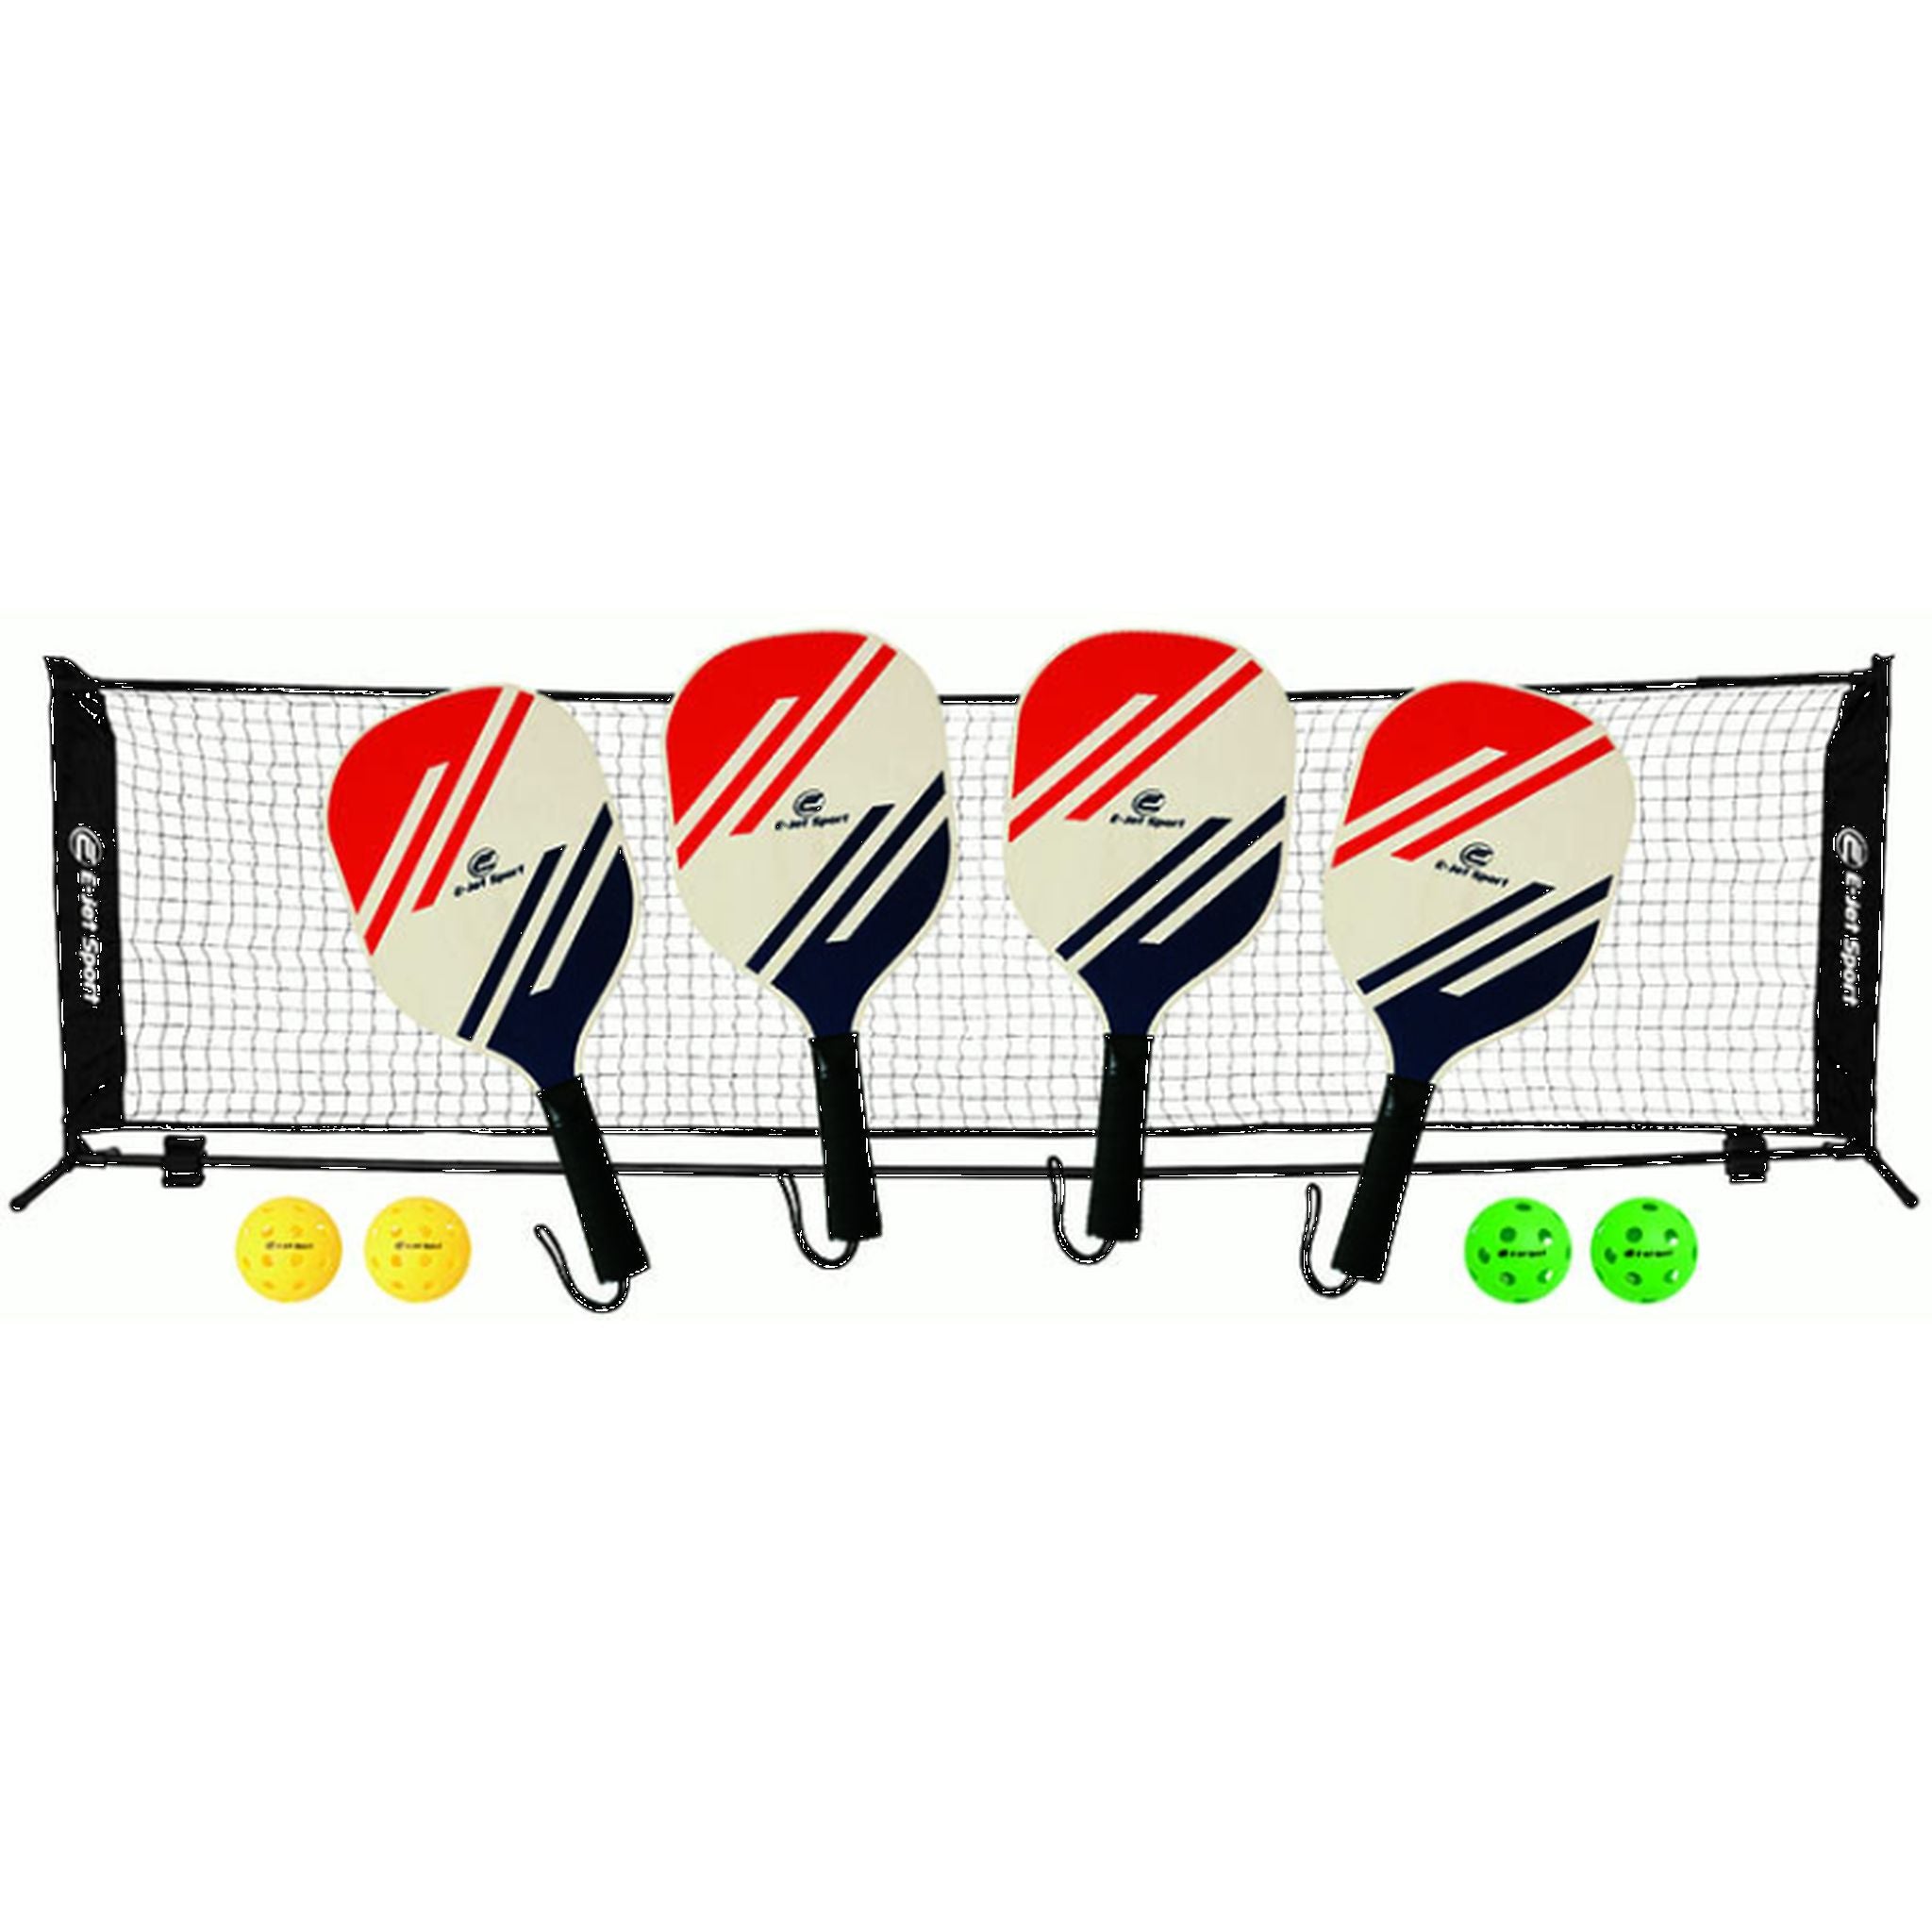 EJET Pickleball 4 Player Set with Net